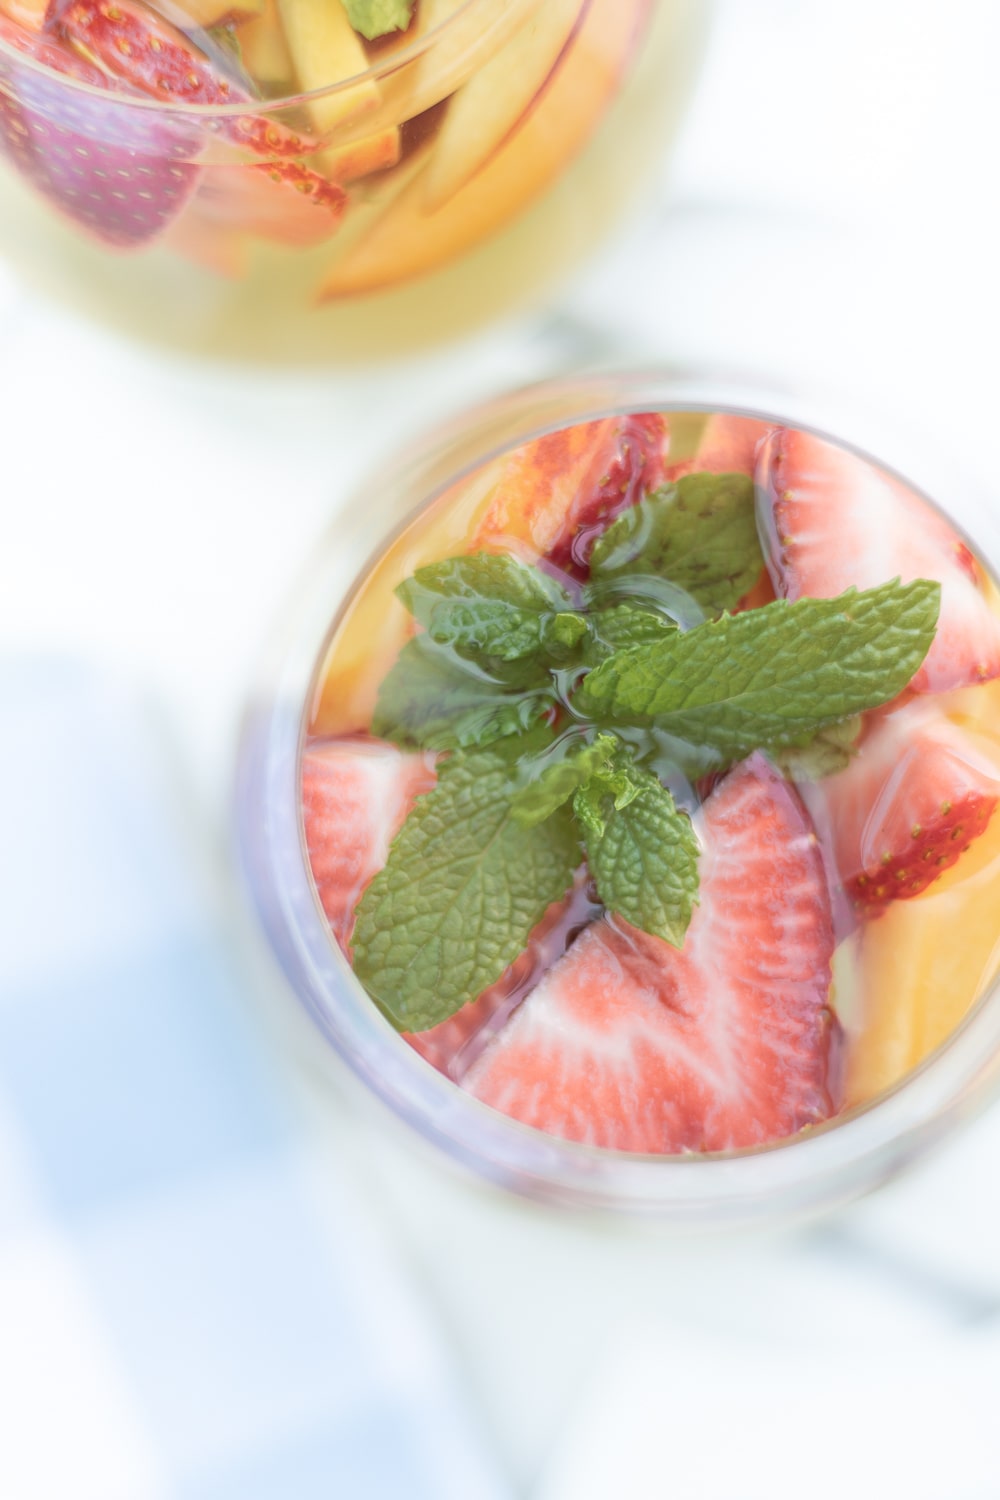 Best white sangria made with chardonnay, elderflower liqueur, strawberries, peaches, and fresh mint by blogger Stephanie Ziajka on Diary of a Debutante